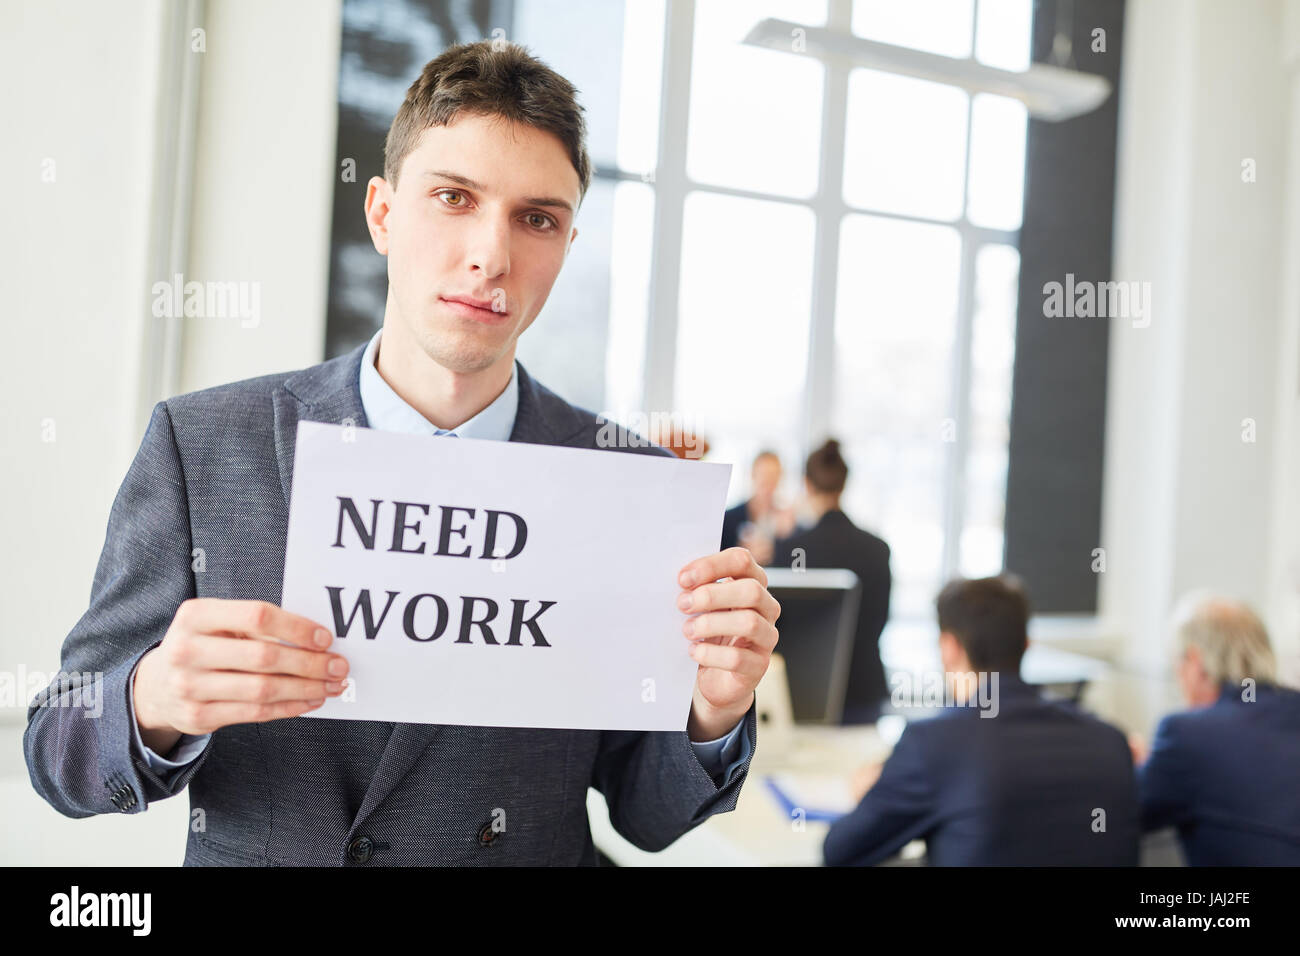 Unemployed man wants to find a job and holds sign Stock Photo